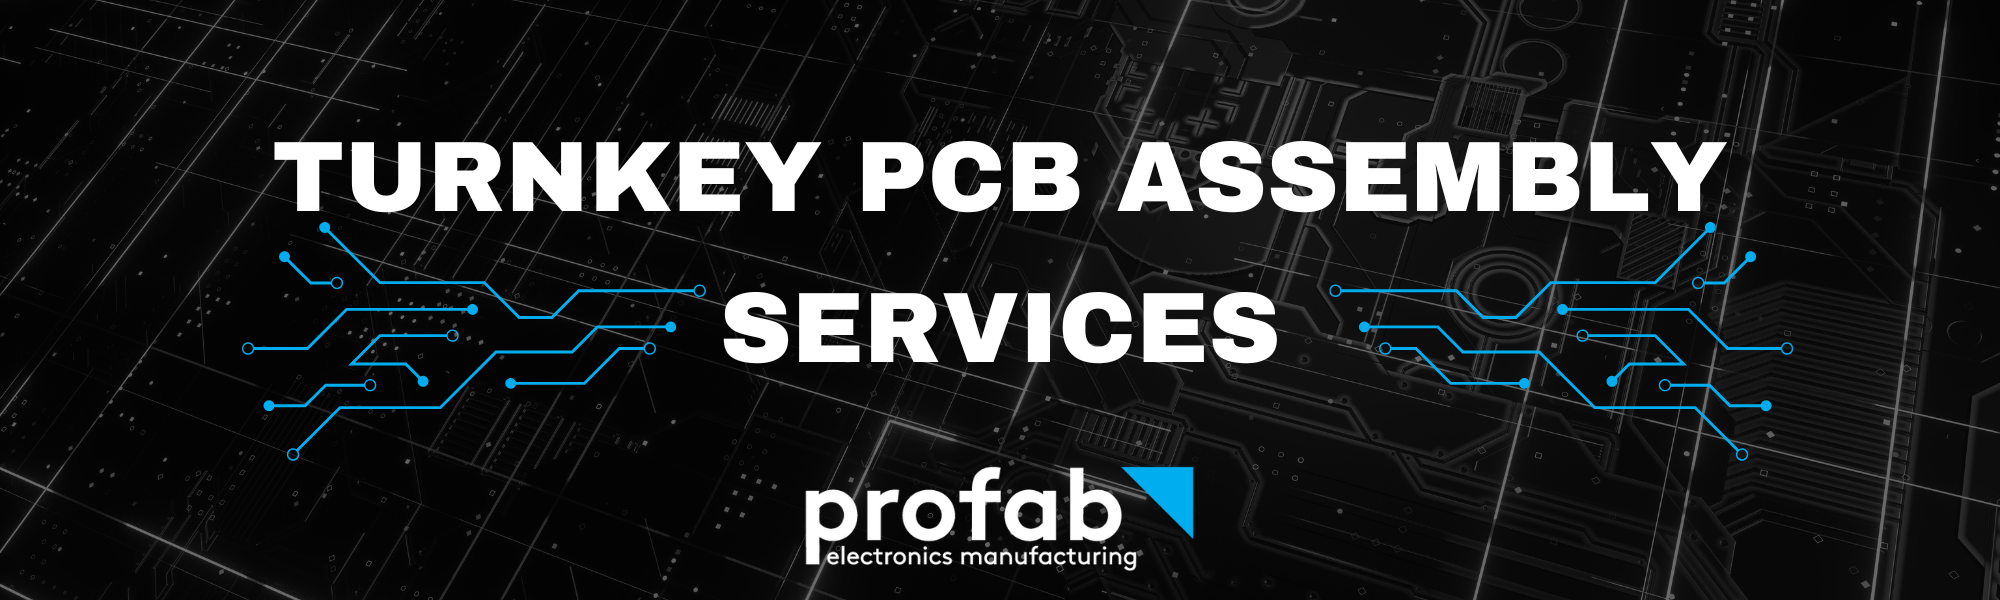 Turnkey PCB Assembly Services